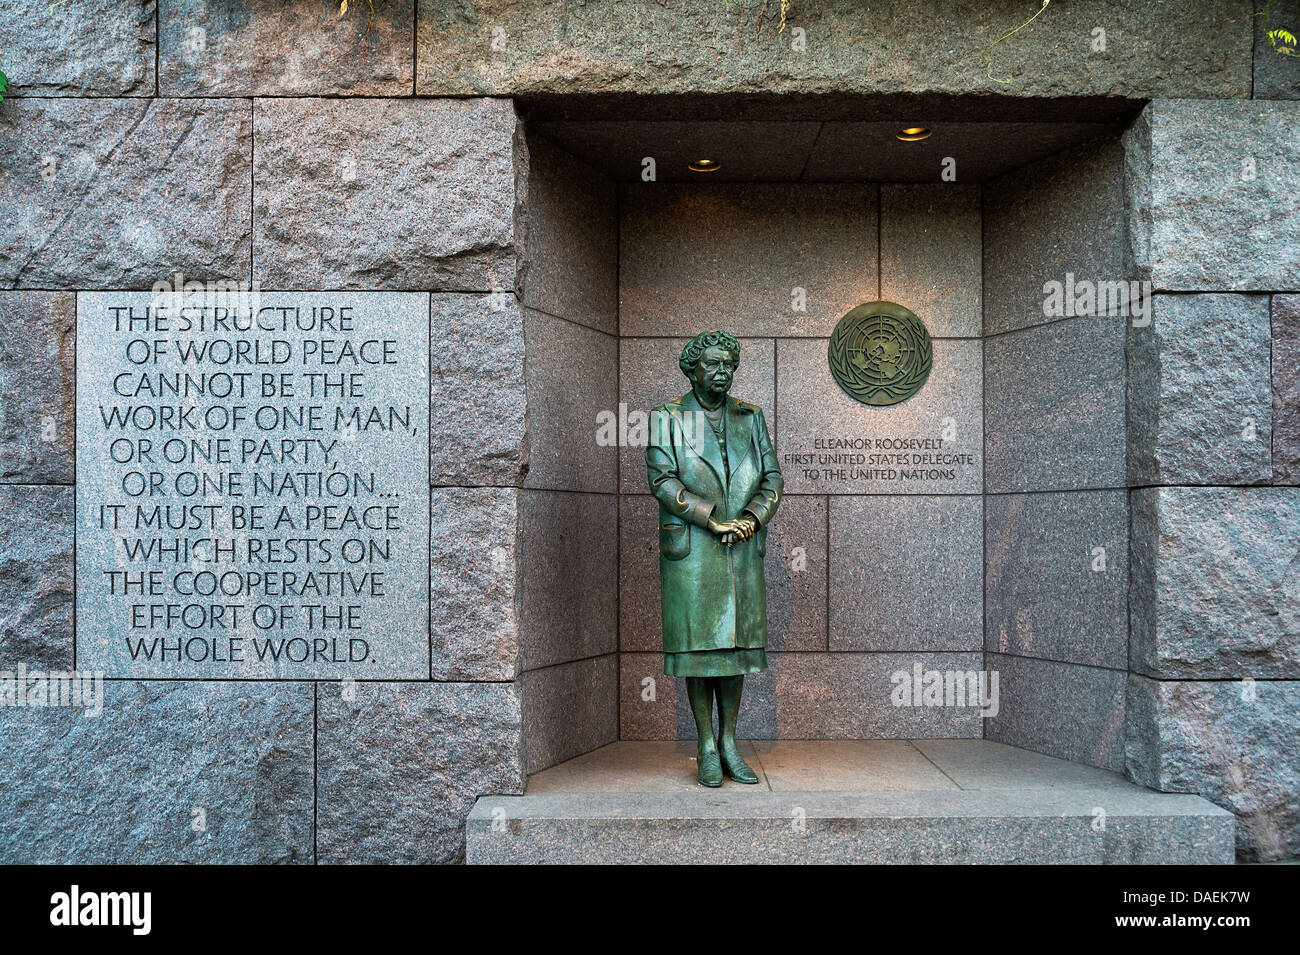 Bronze statue of First Lady Eleanor Roosevelt standing before the United Nations emblem honors her dedication to the UN, Frankli Stock Photo